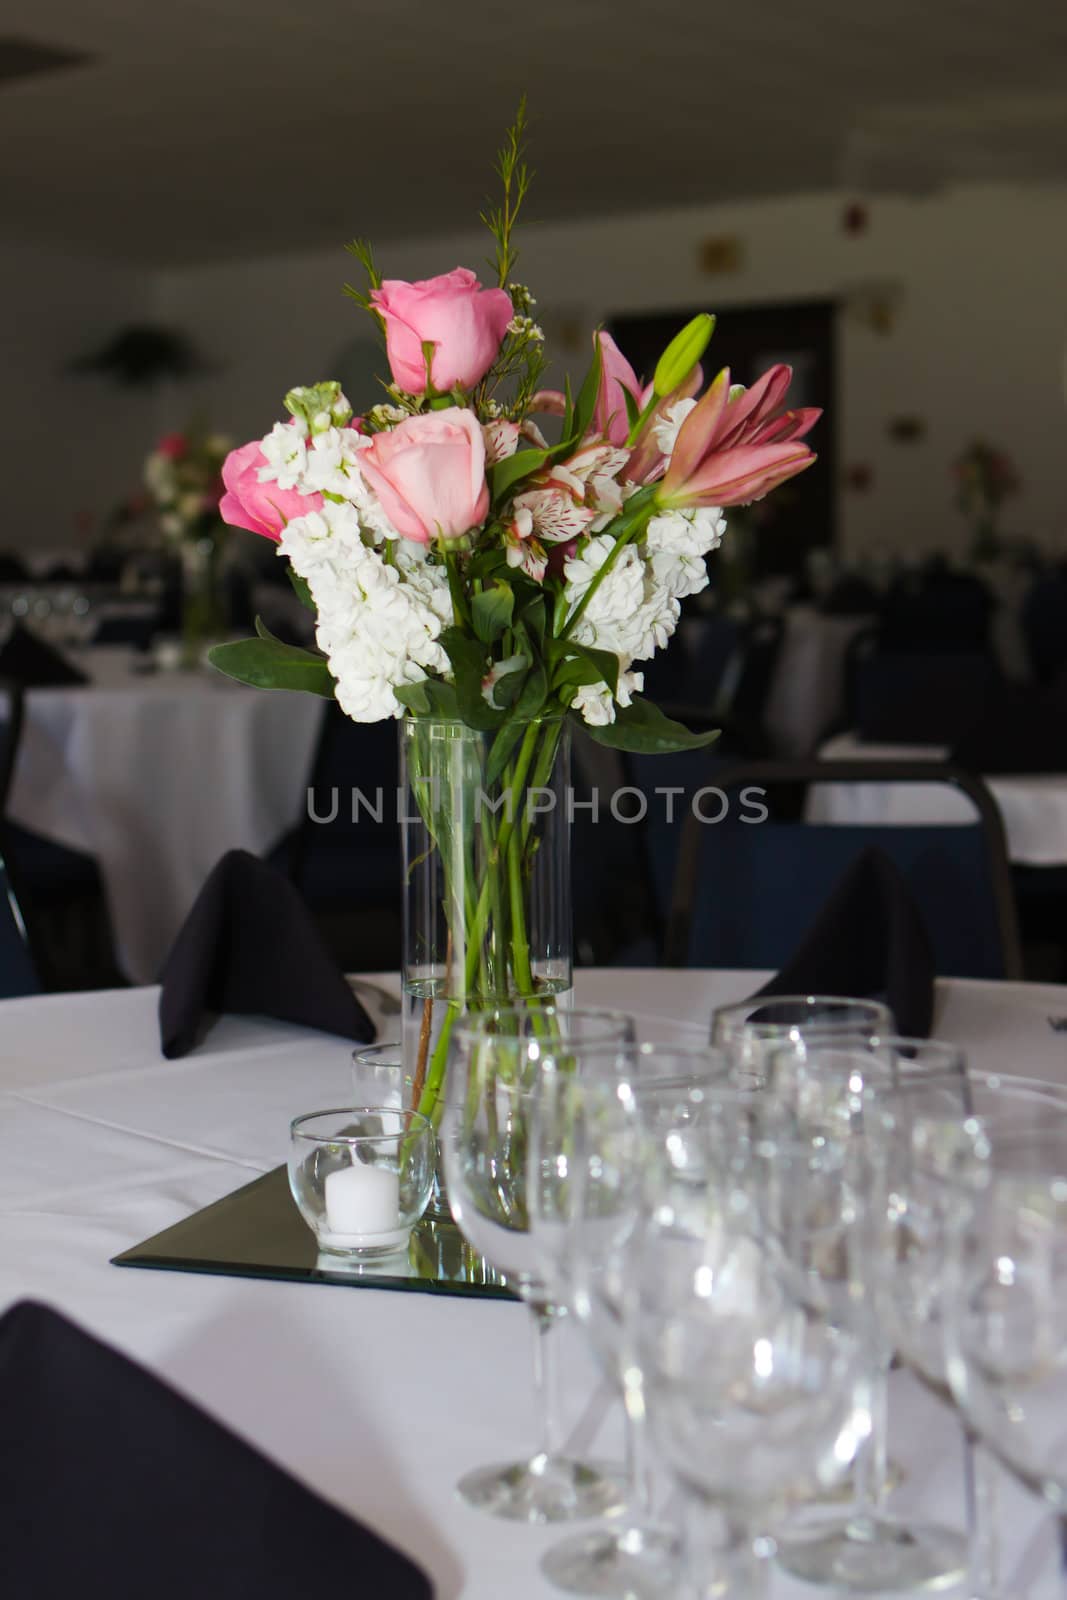 Bouquet of flowers in a vase on the table.
